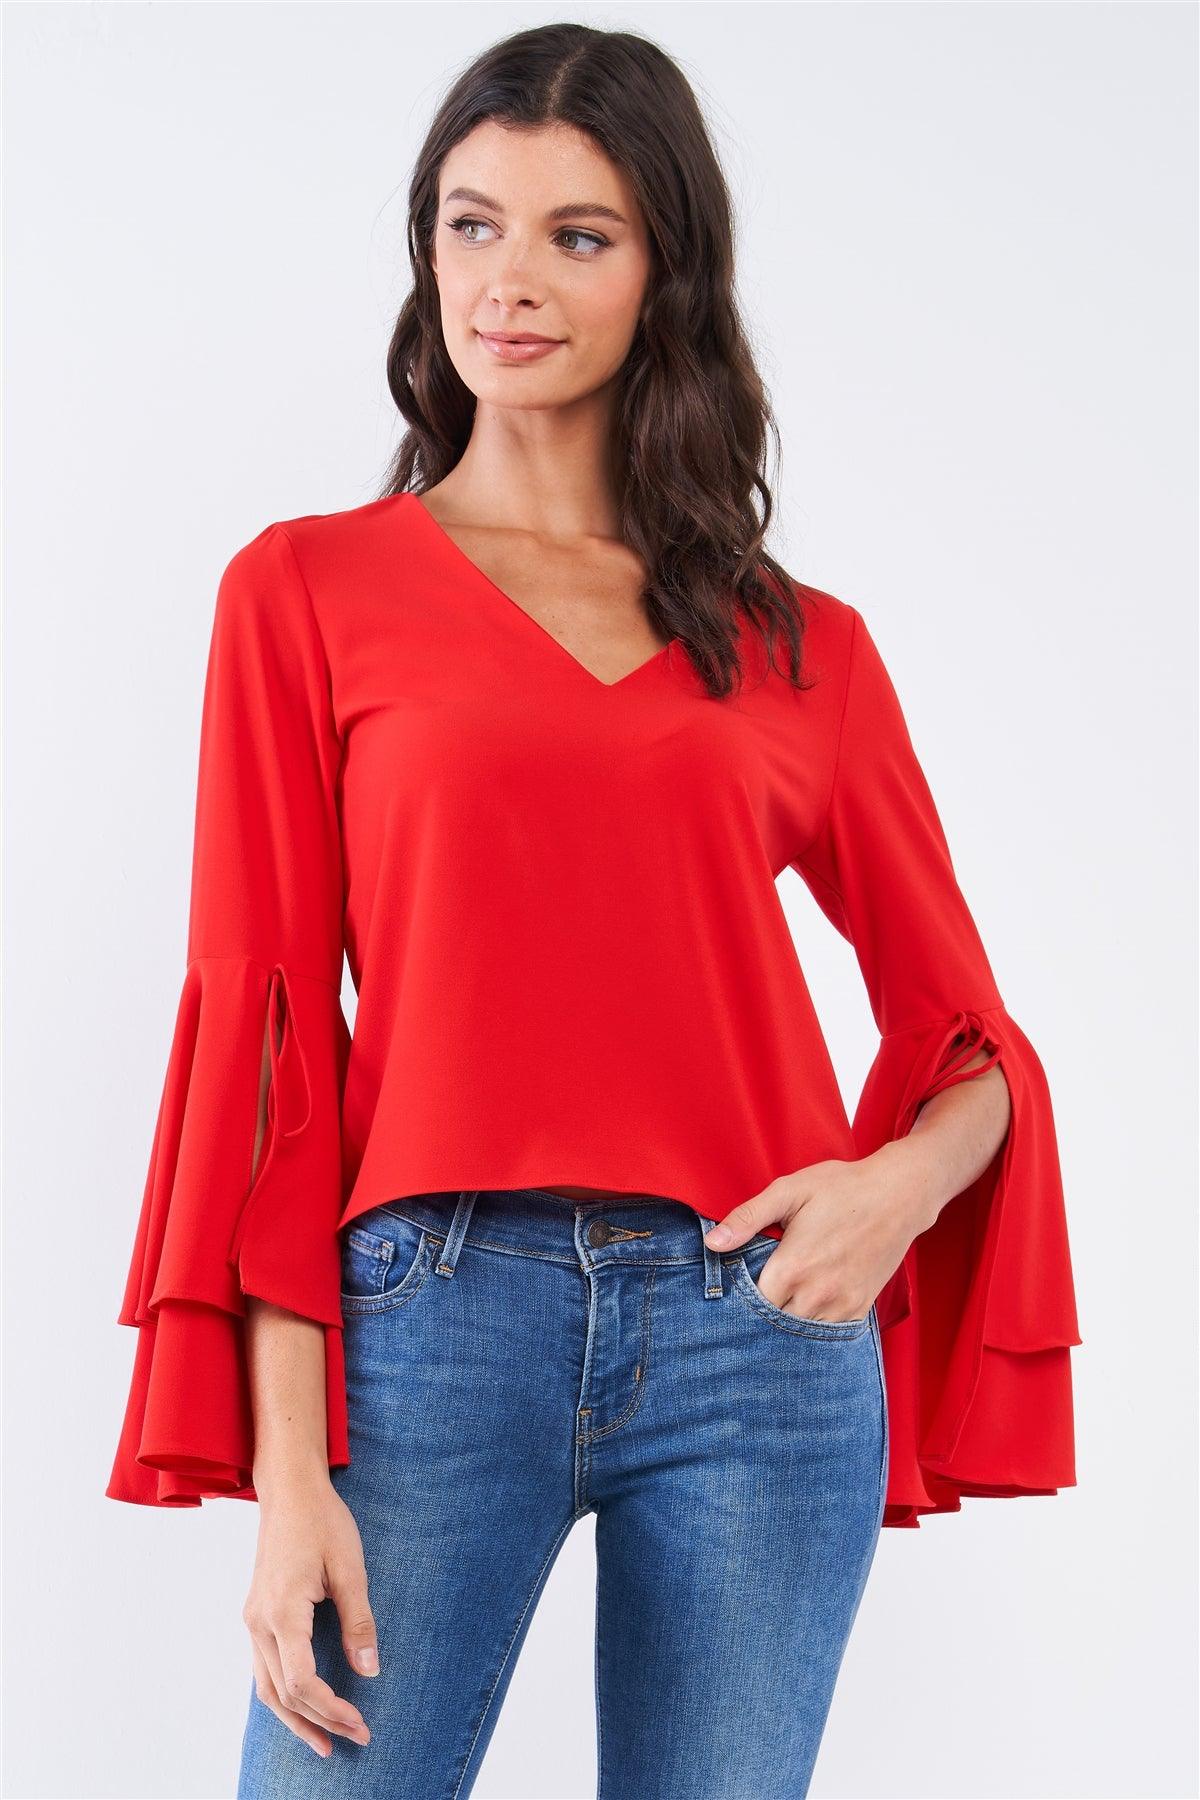 Crimson Red V-Neck Long Bluebell Slit Draw String Tie Double Frill Sleeve Top